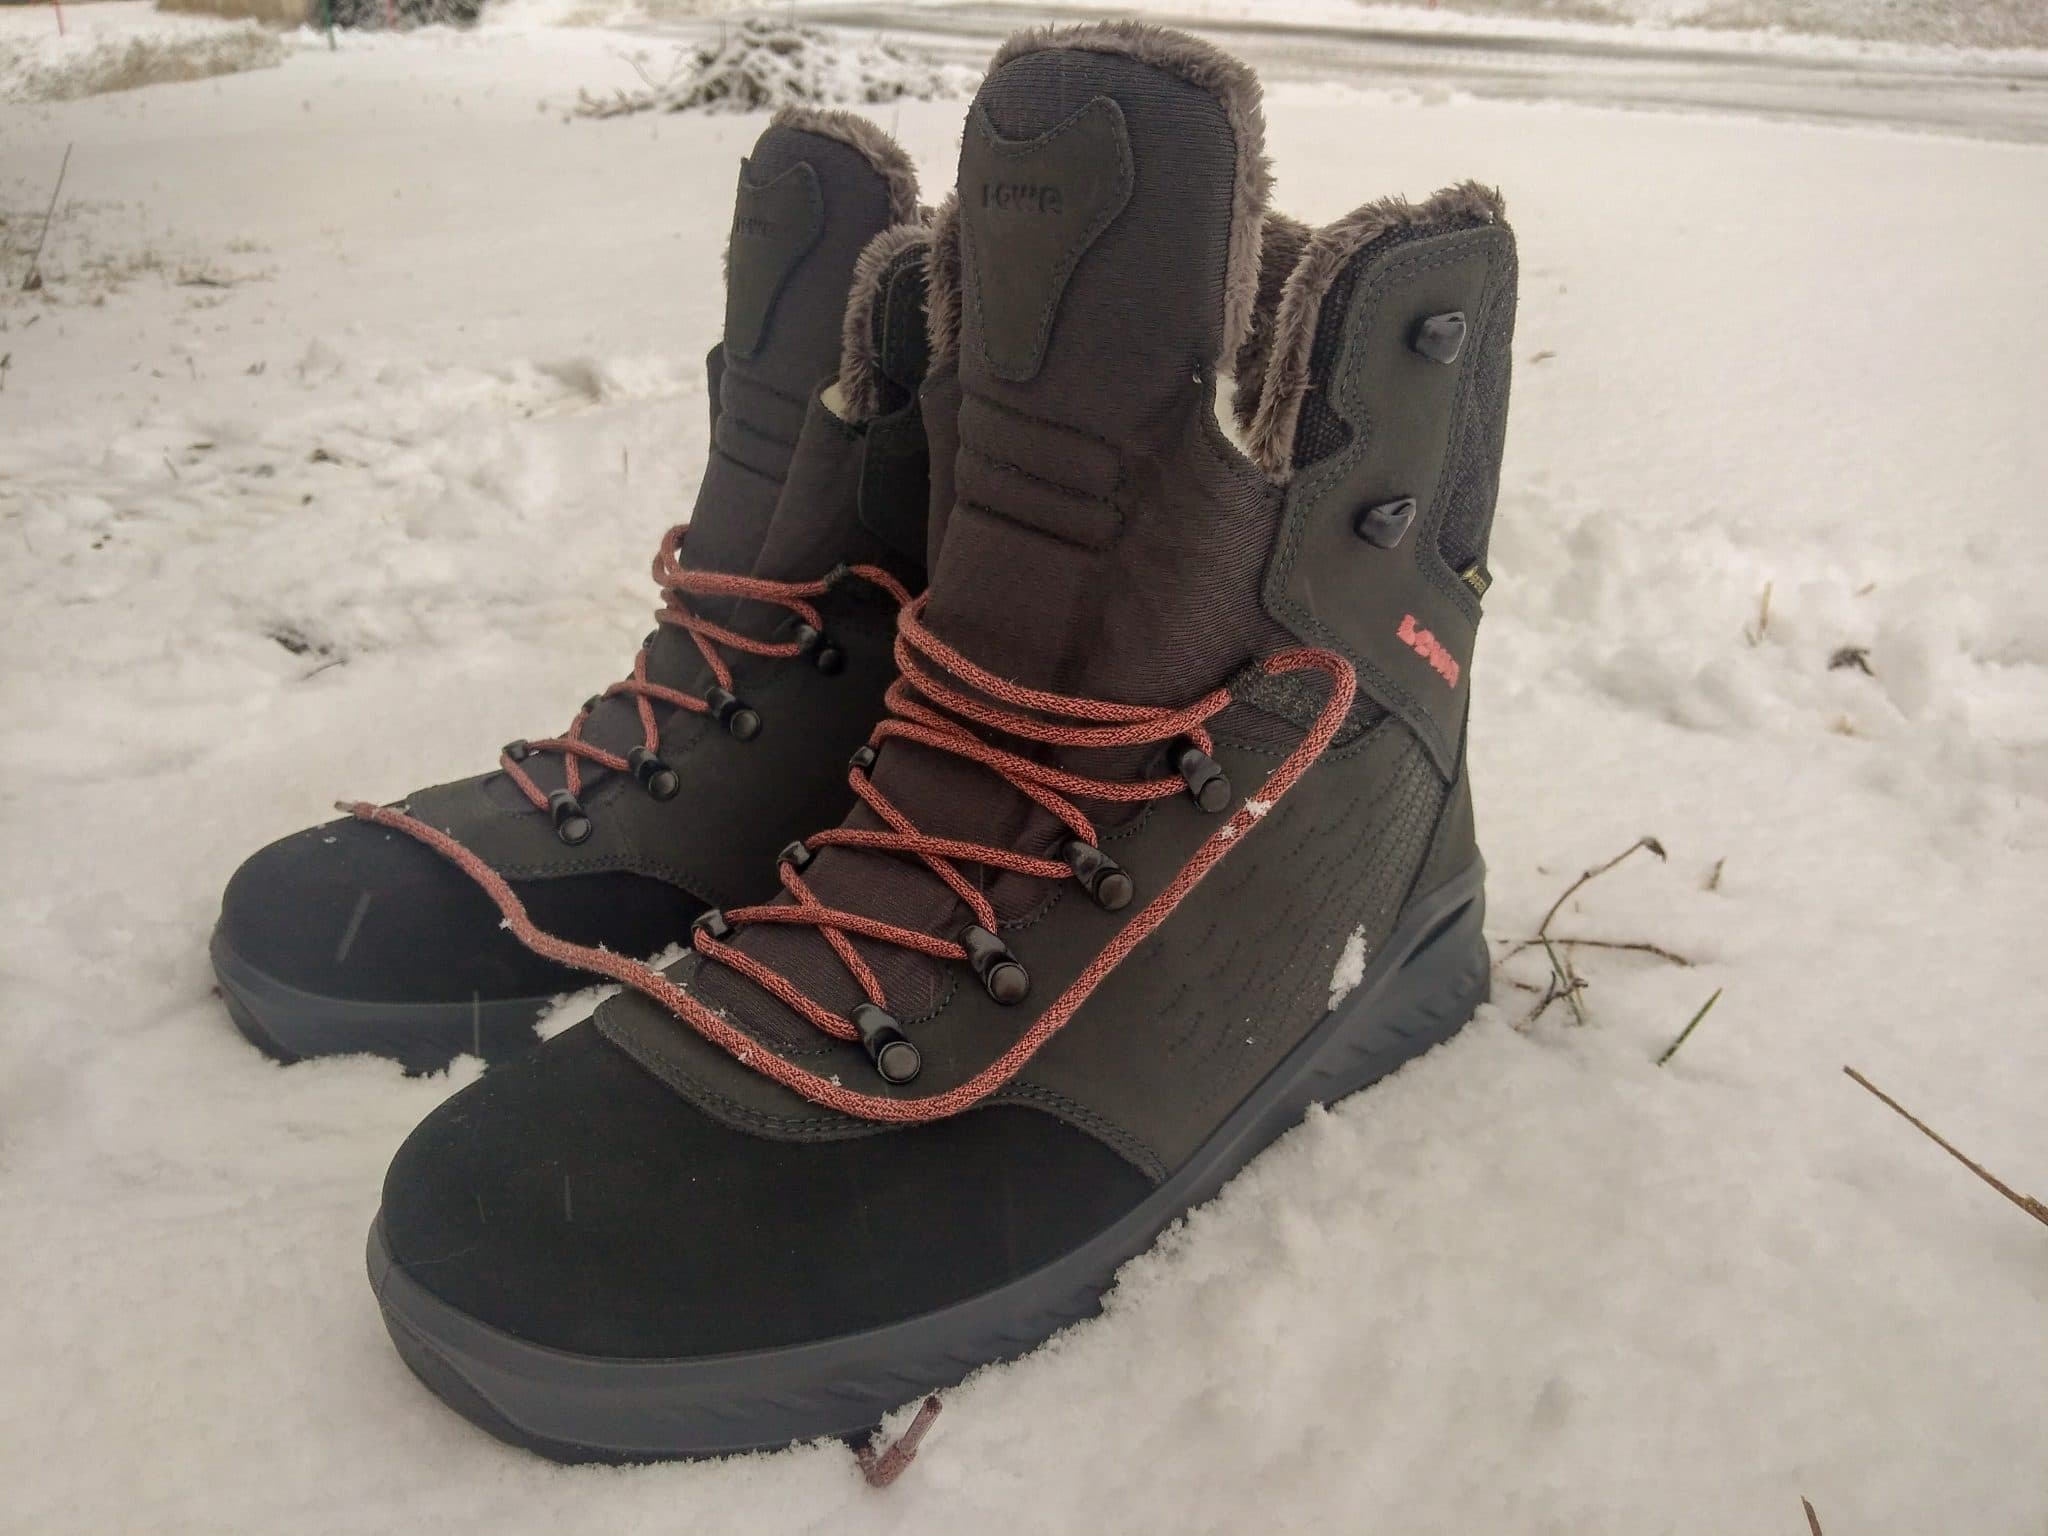 Crimineel Albany Stout Test des chaussures hivernales Lowa Nabucco Evo GTX Ws